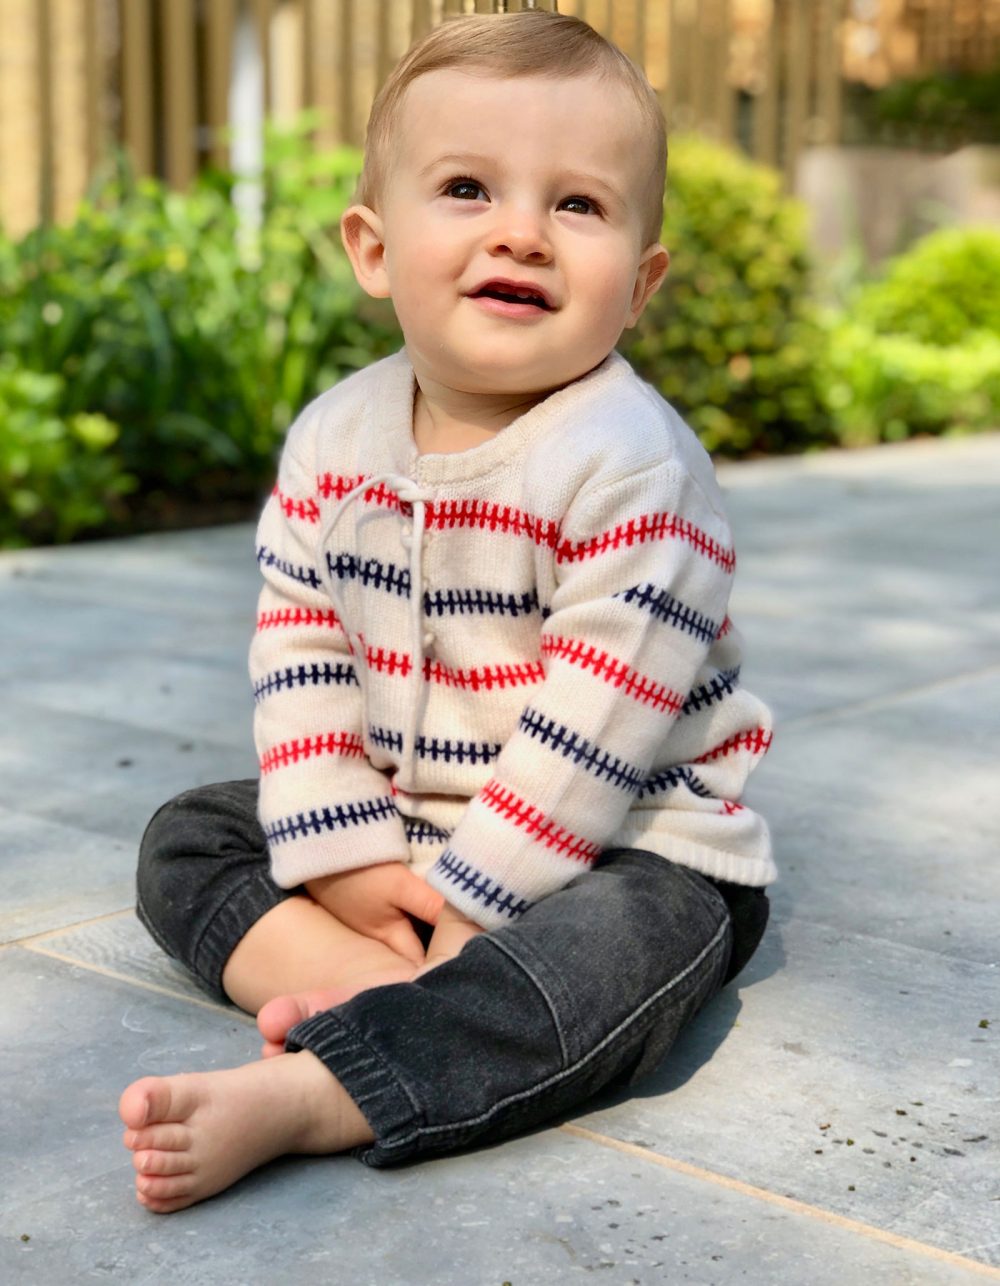 A smiling child in the Baby Fisher kids cashmere jumper, part of the malin darlin childrens cashmere collection.